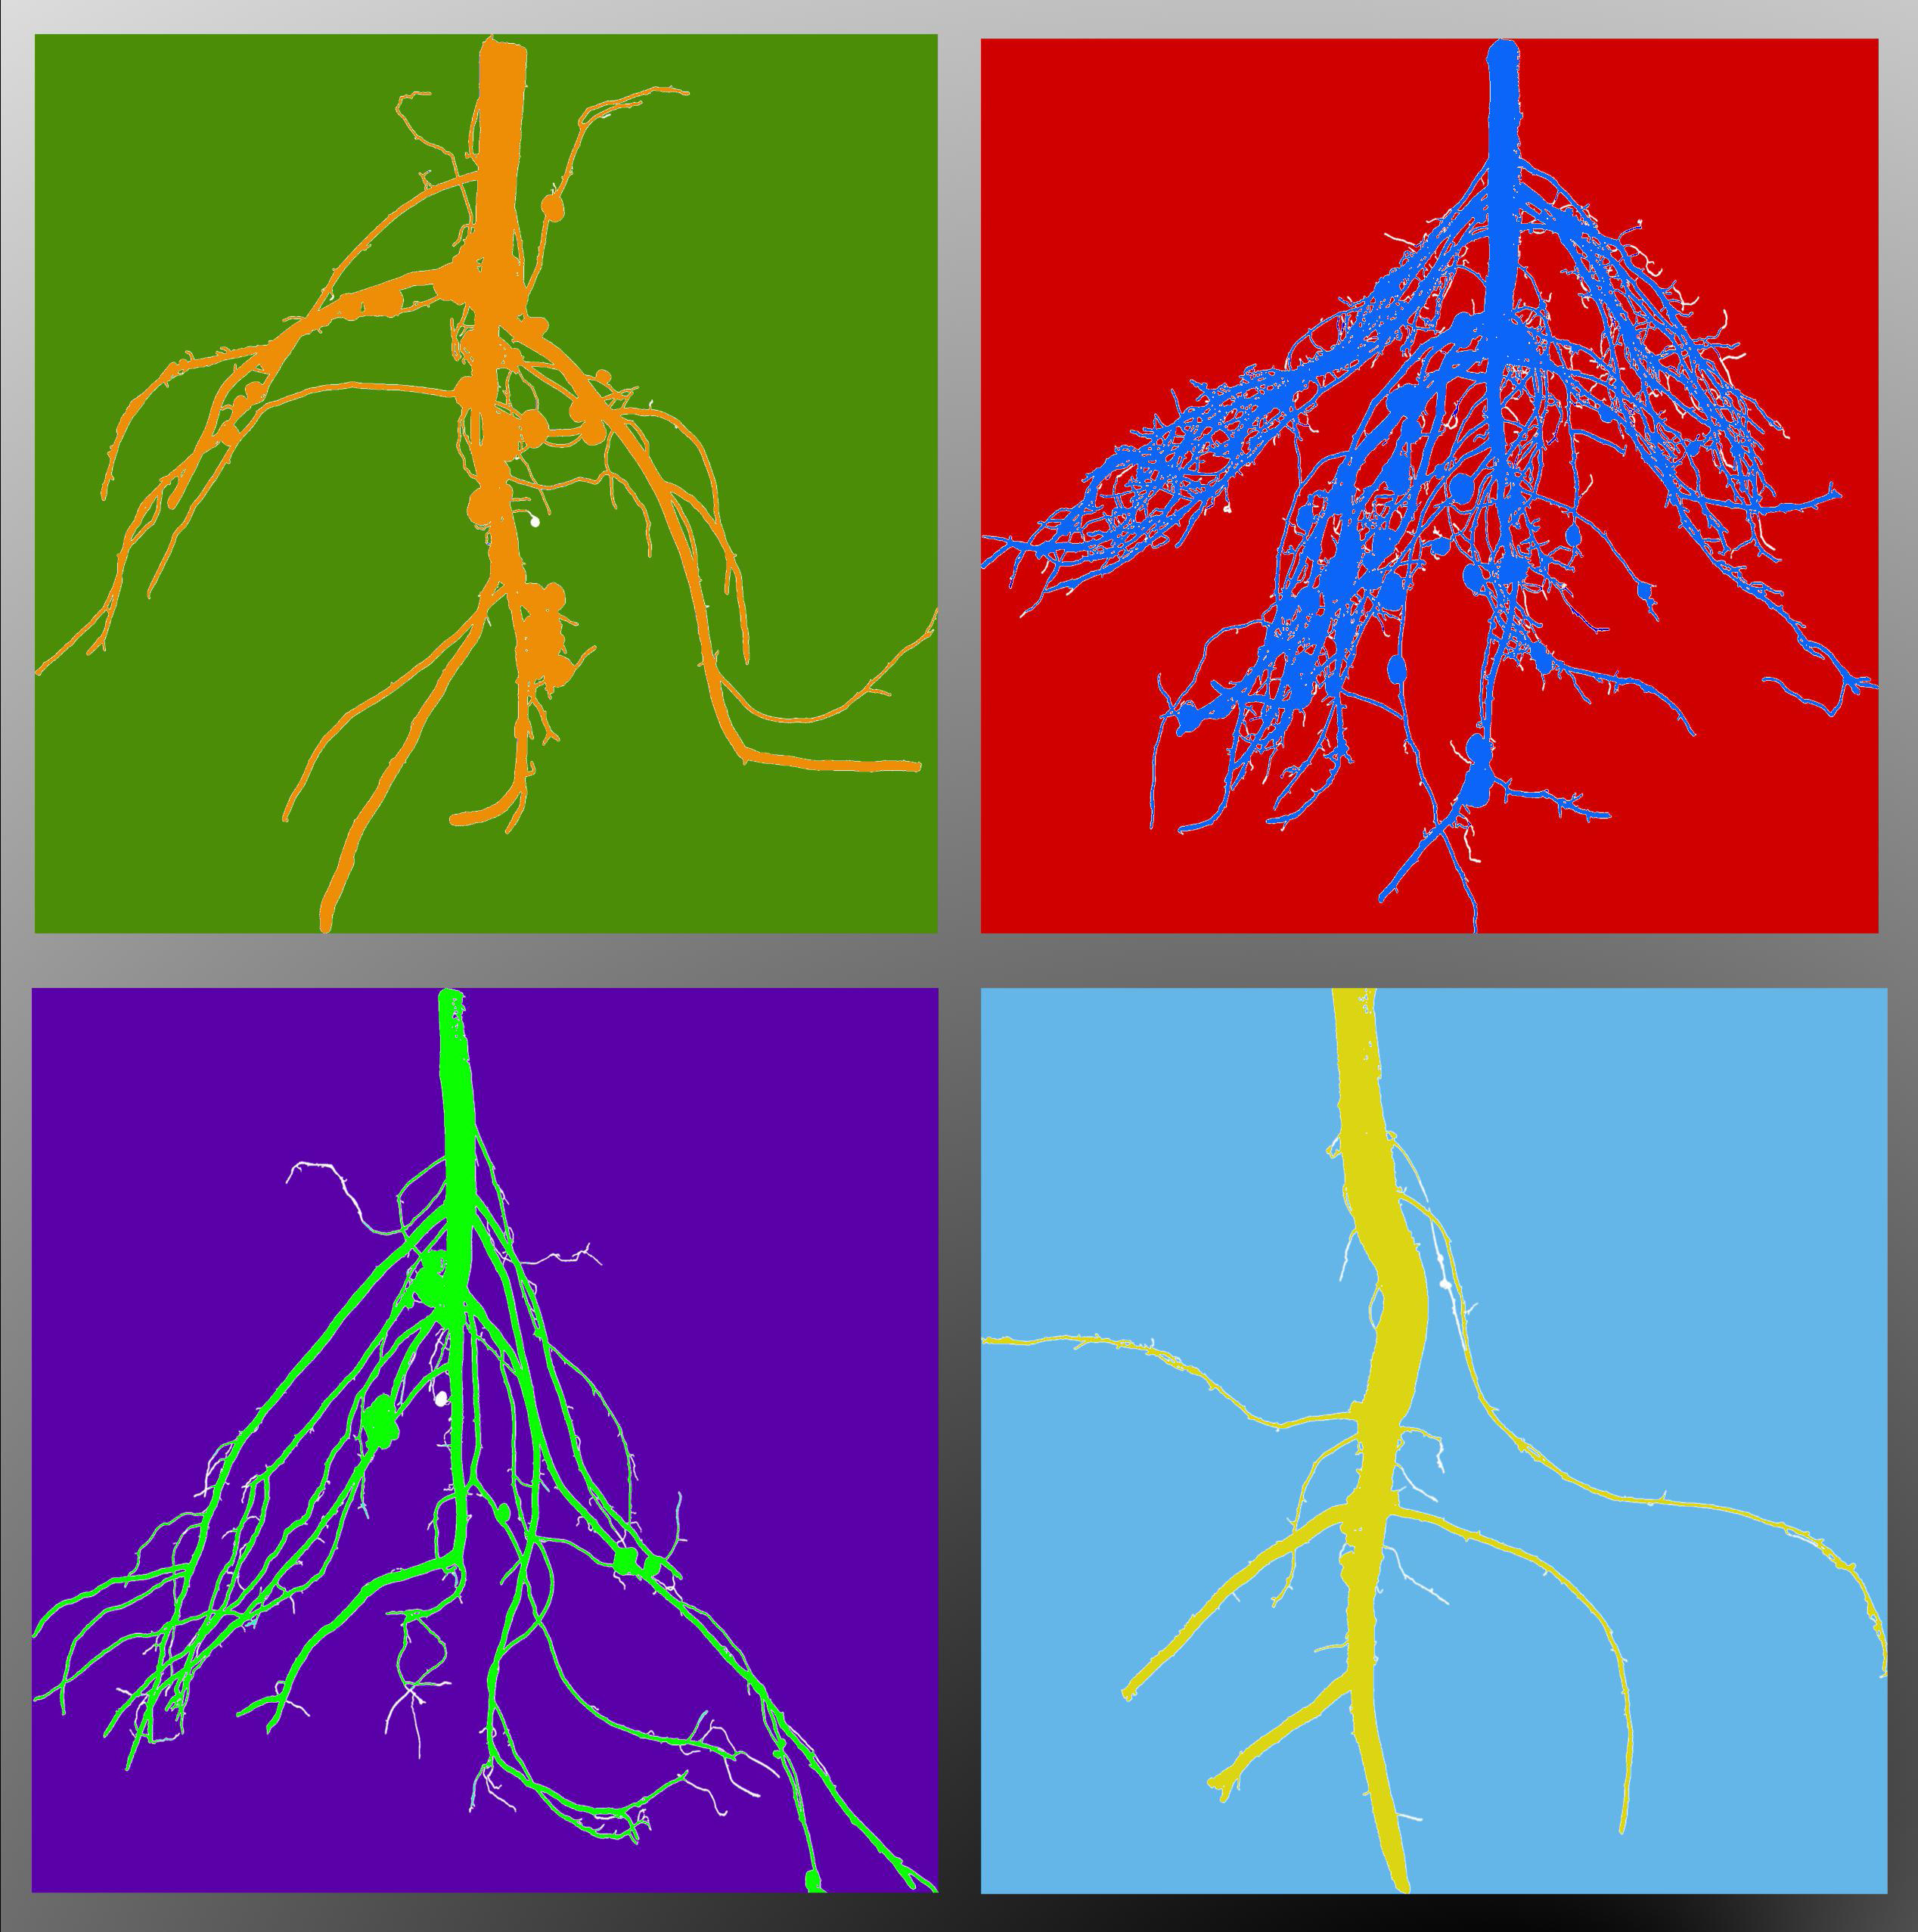 Graphic produced for the cover of the October 2014 issue of the journal Plant Physiology by Alexander Bucksch. The image is composed of computed binary image masks of cowpea roots.Copyright by the American Society of Plant Biologists, reprinted with permission.